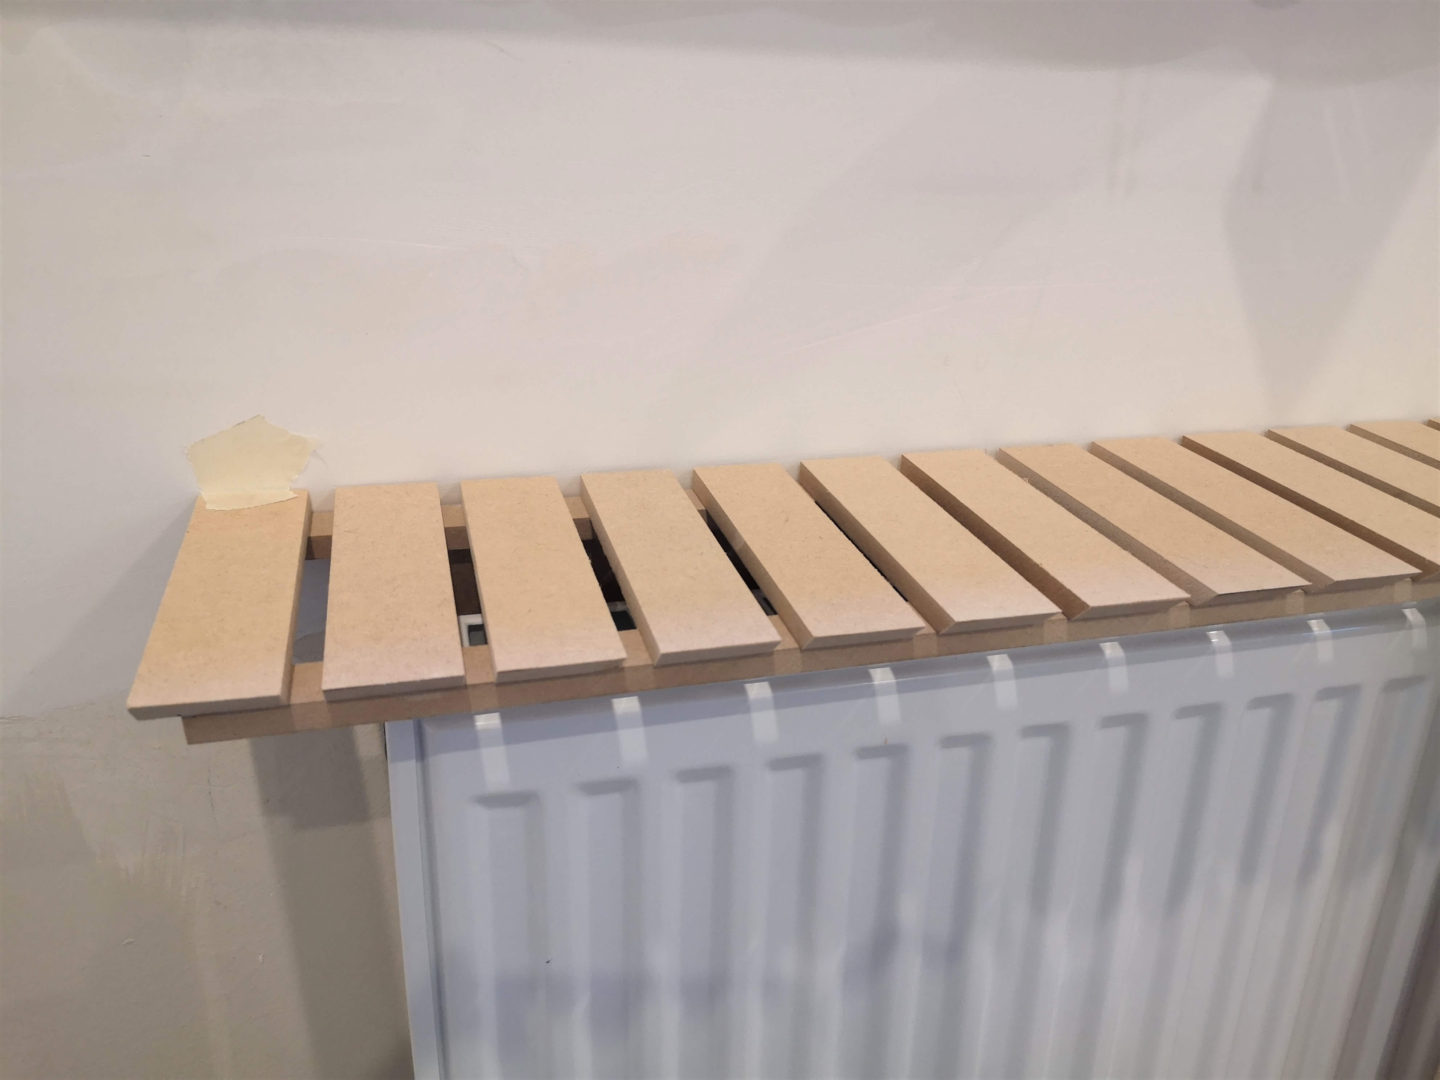 Short MDF slats glued together to form the top of a radiator cover.